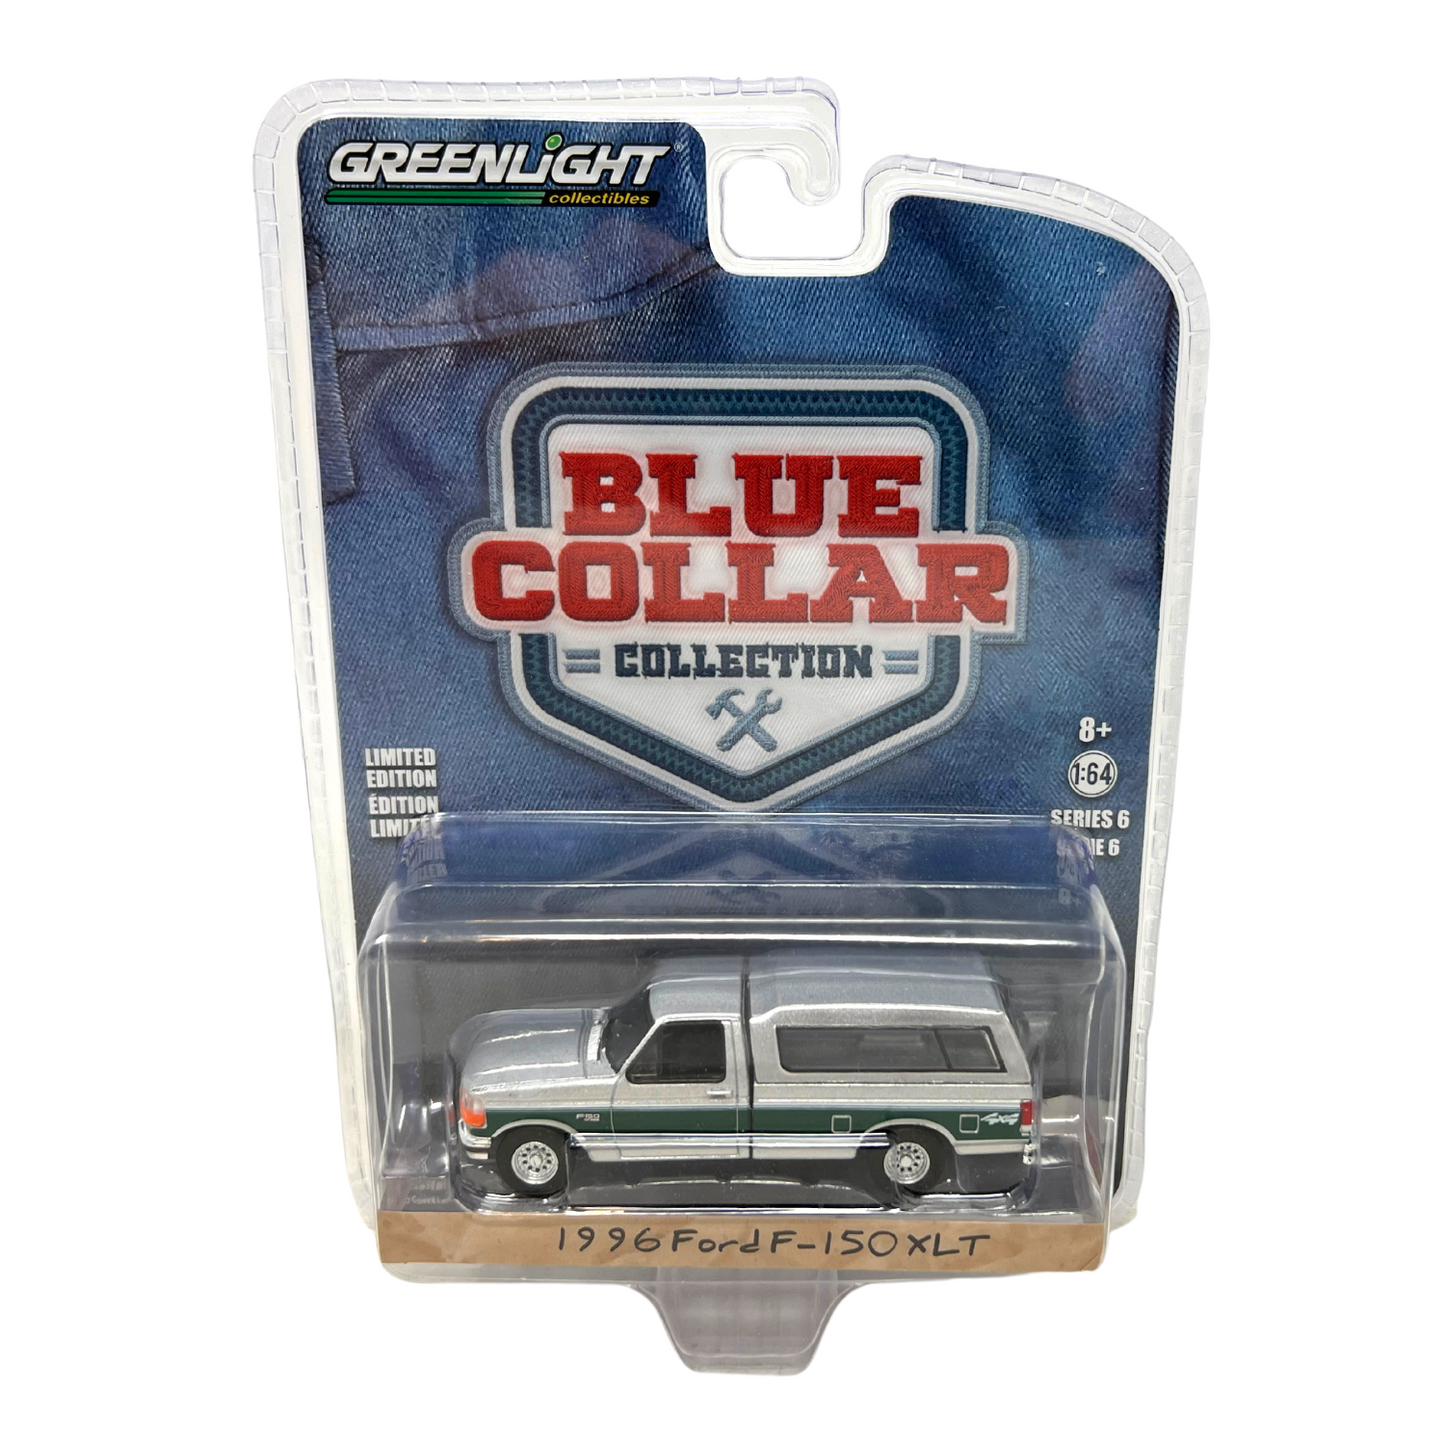 Greenlight Blue Collar Collection Series 6 1996 Ford F-150 XLT 1:64 Diecast